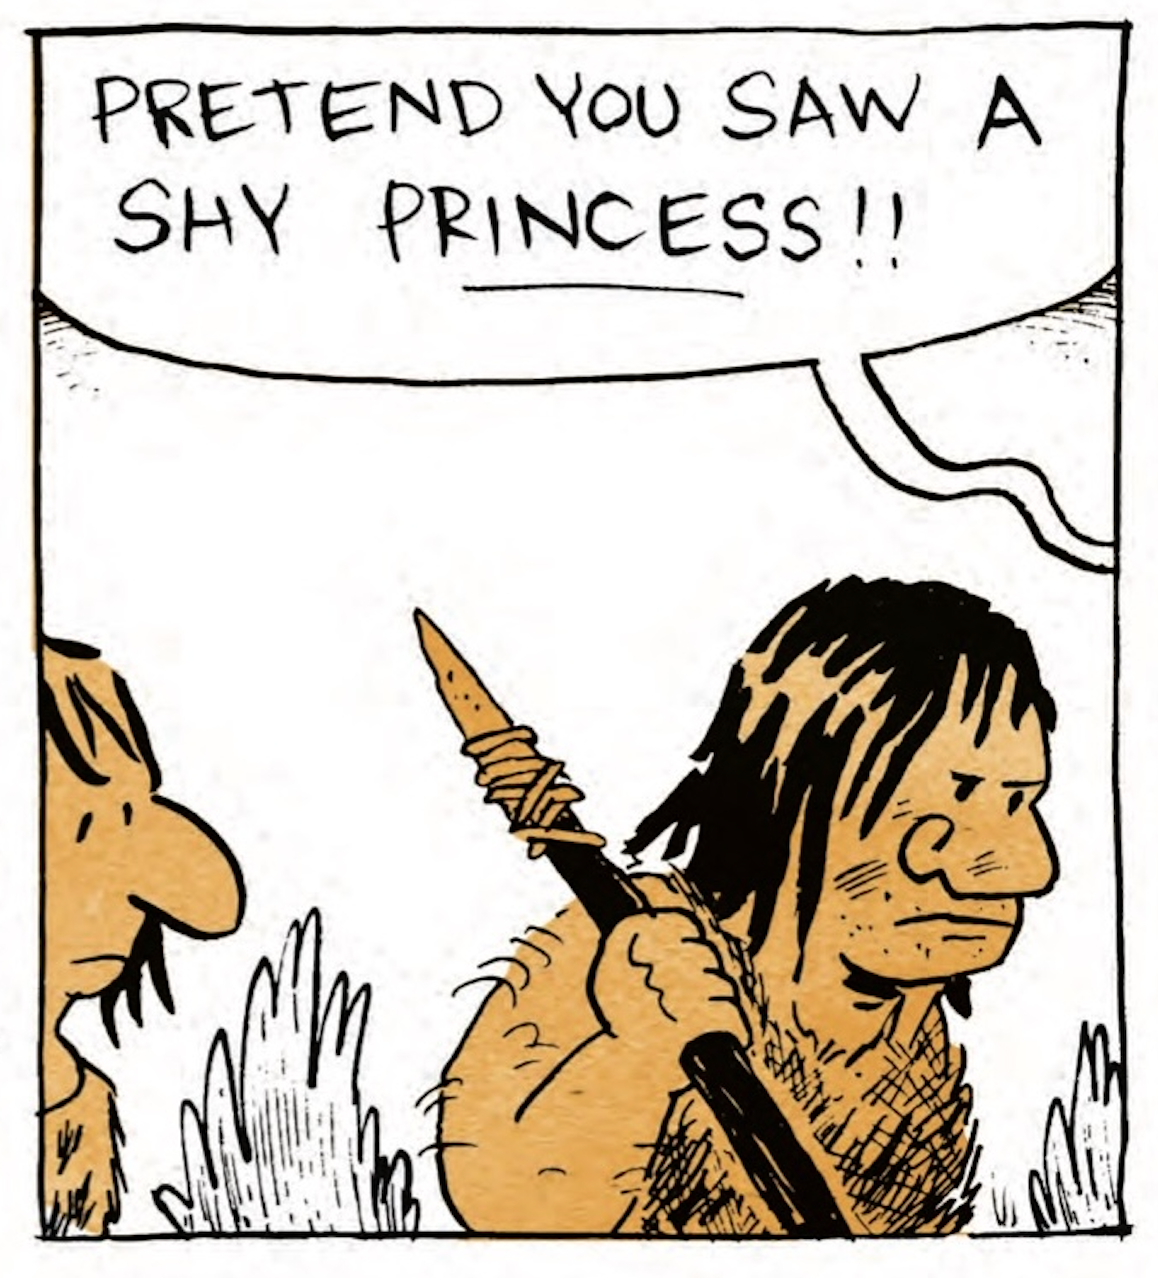 Cave people look on unamused as B continues, â€œPretend you saw a shy PRINCESS!â€